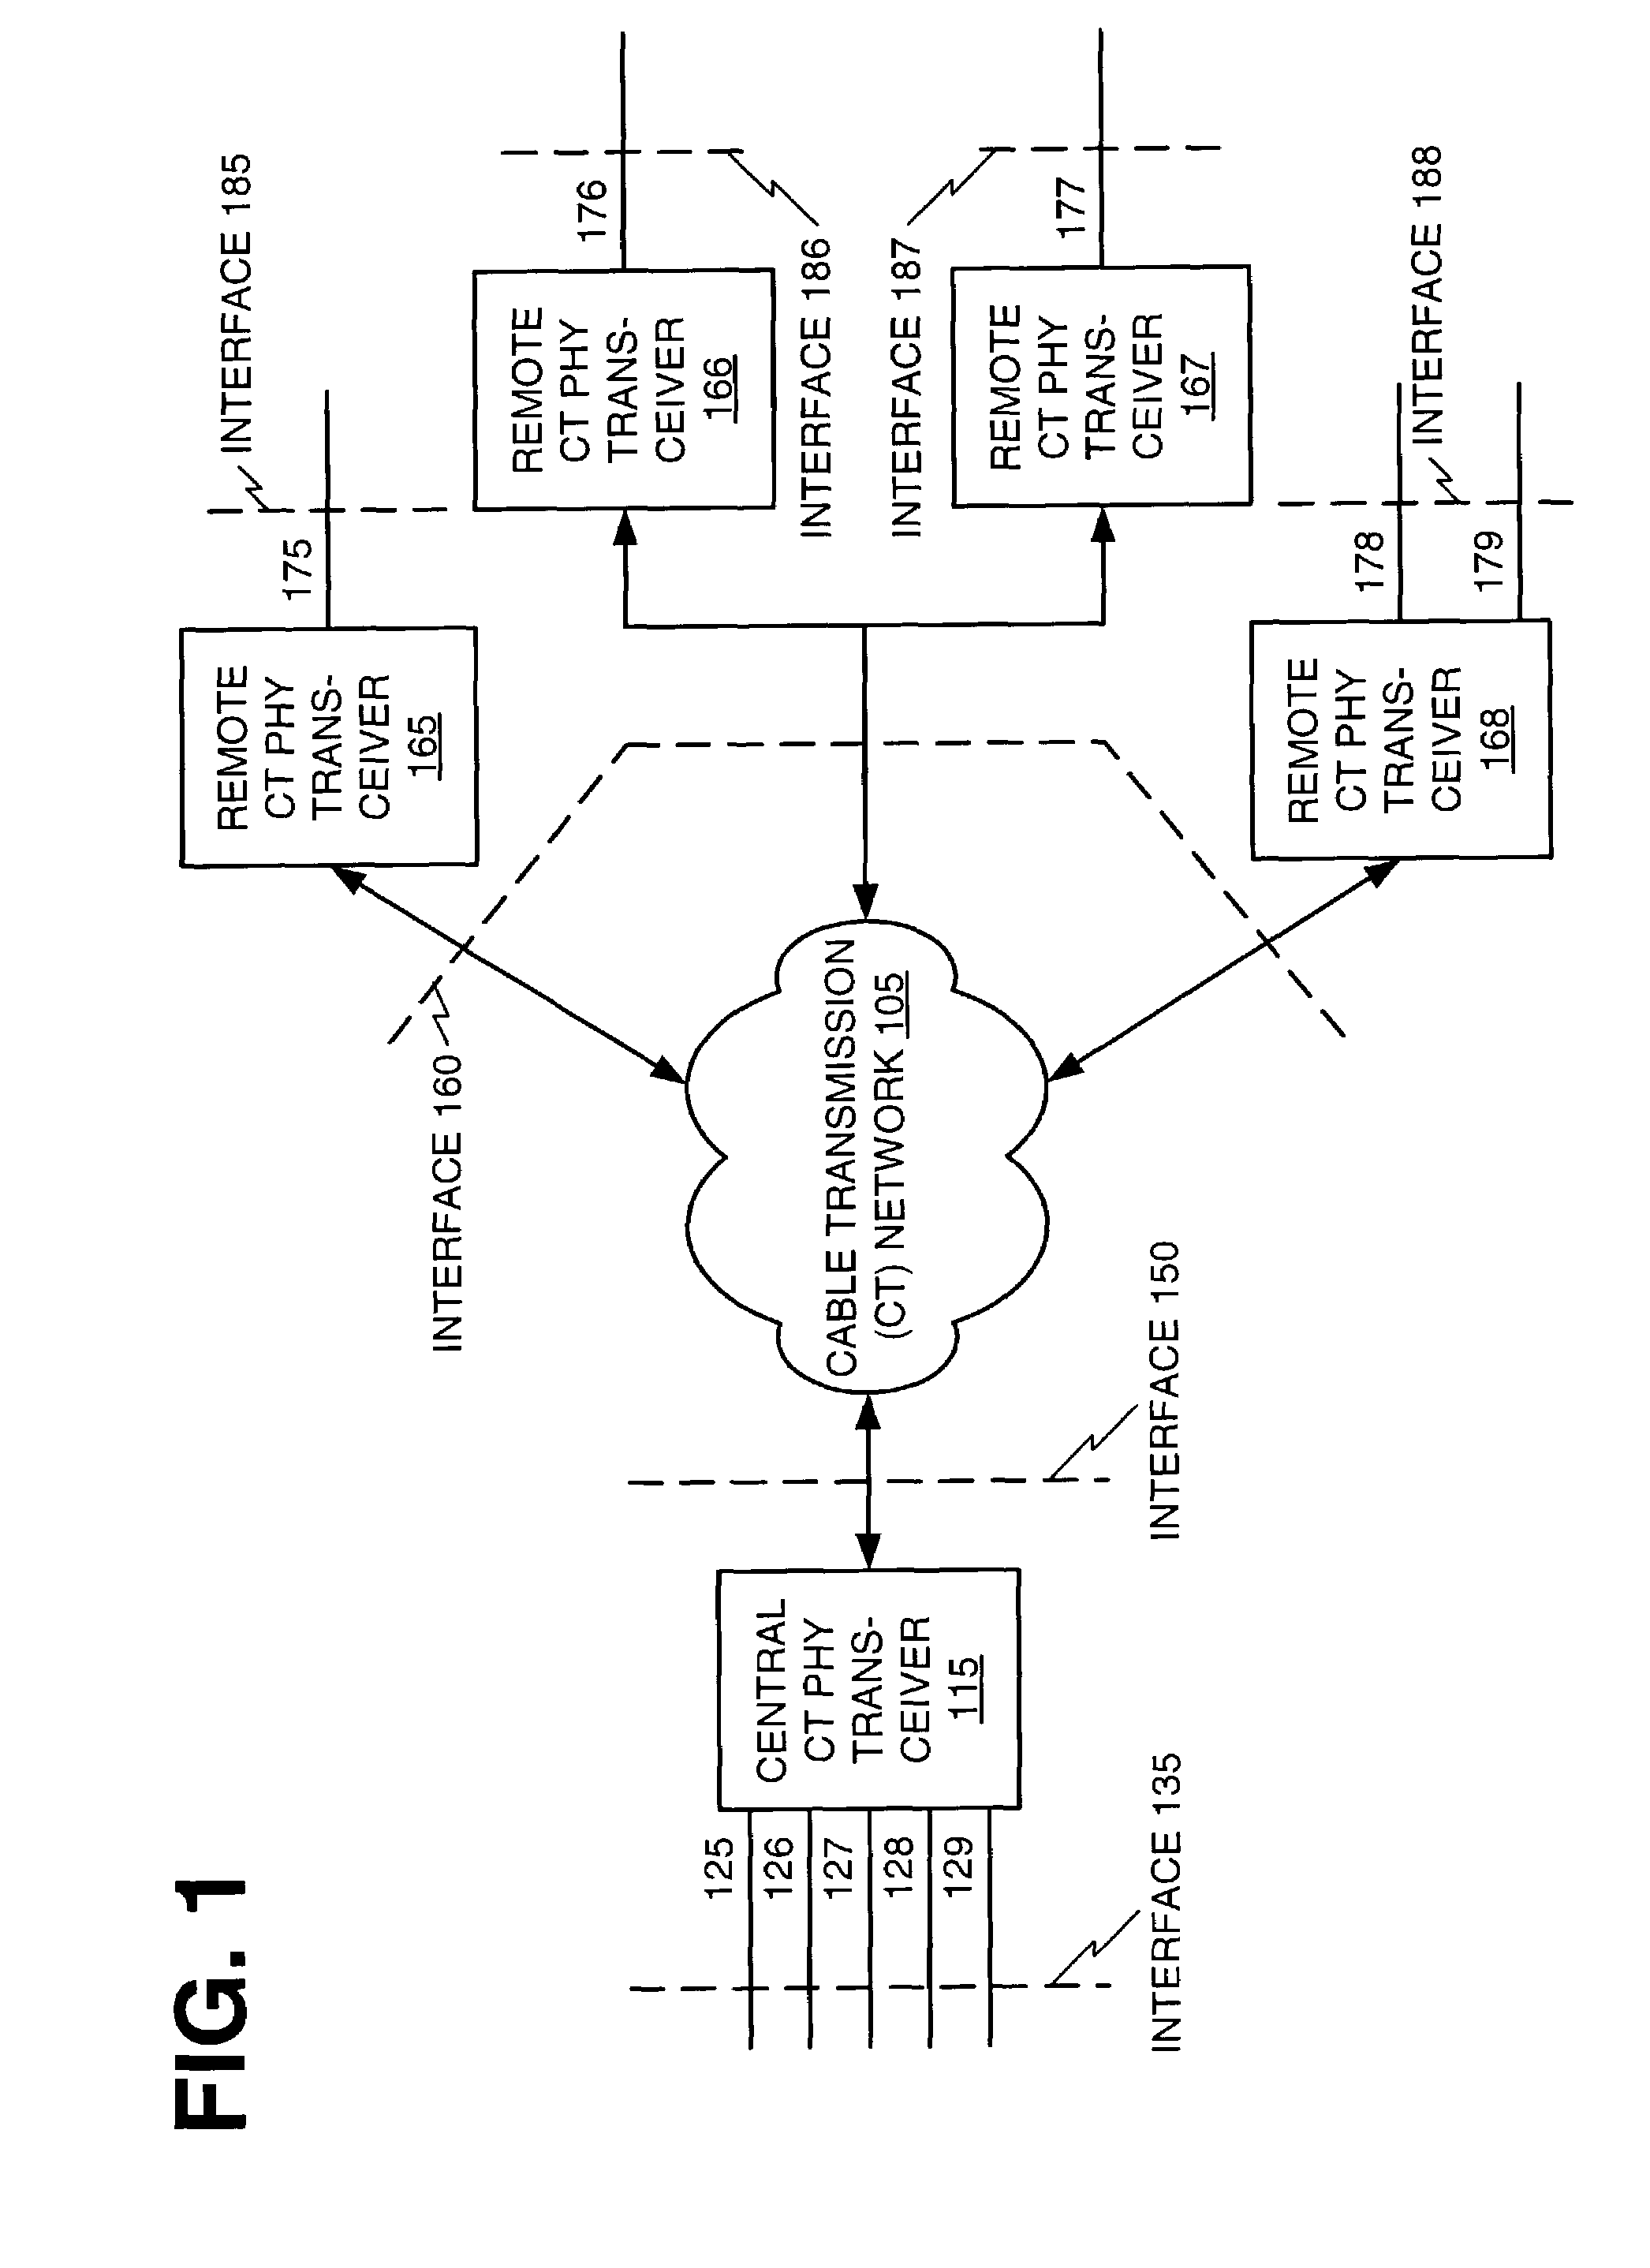 Multi-carrier frequency-division multiplexing (FDM) architecture for high speed digital service